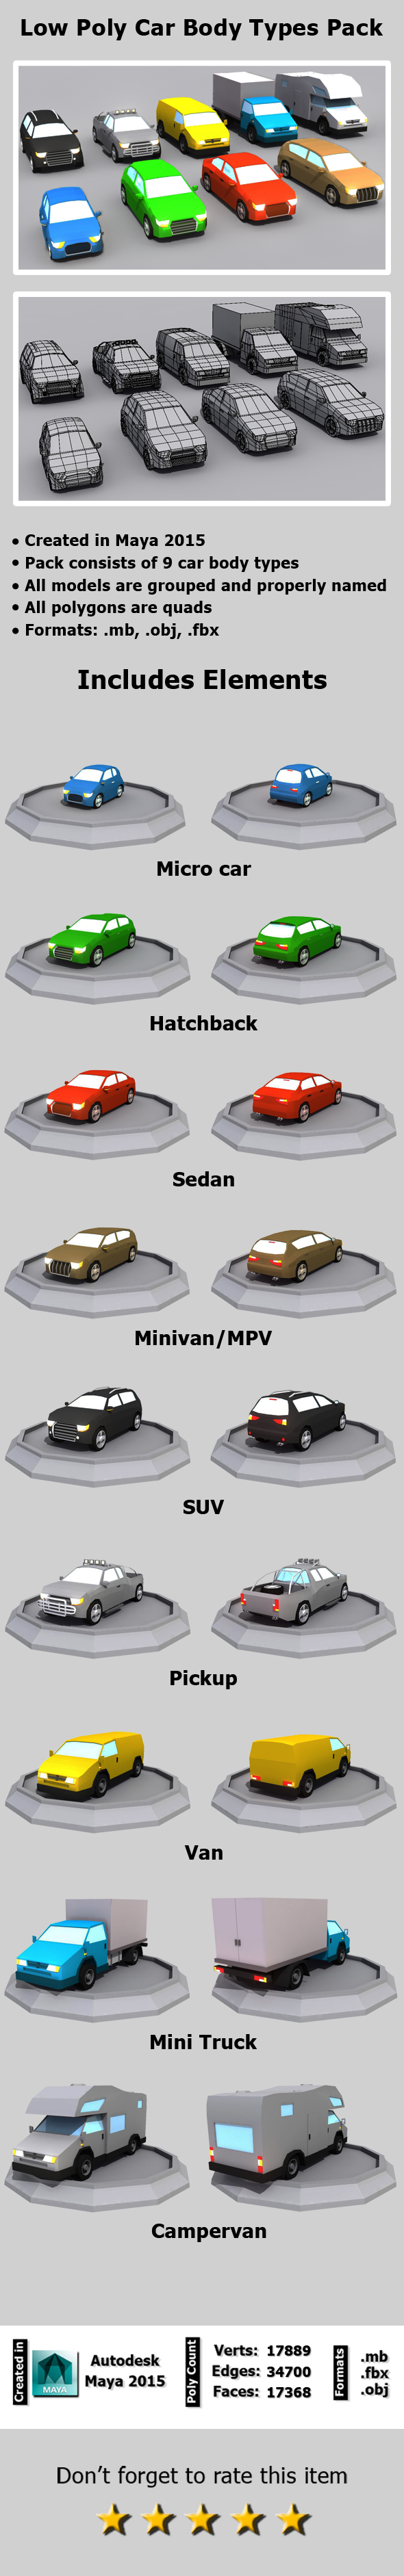 Low Poly Car Body Types Pack